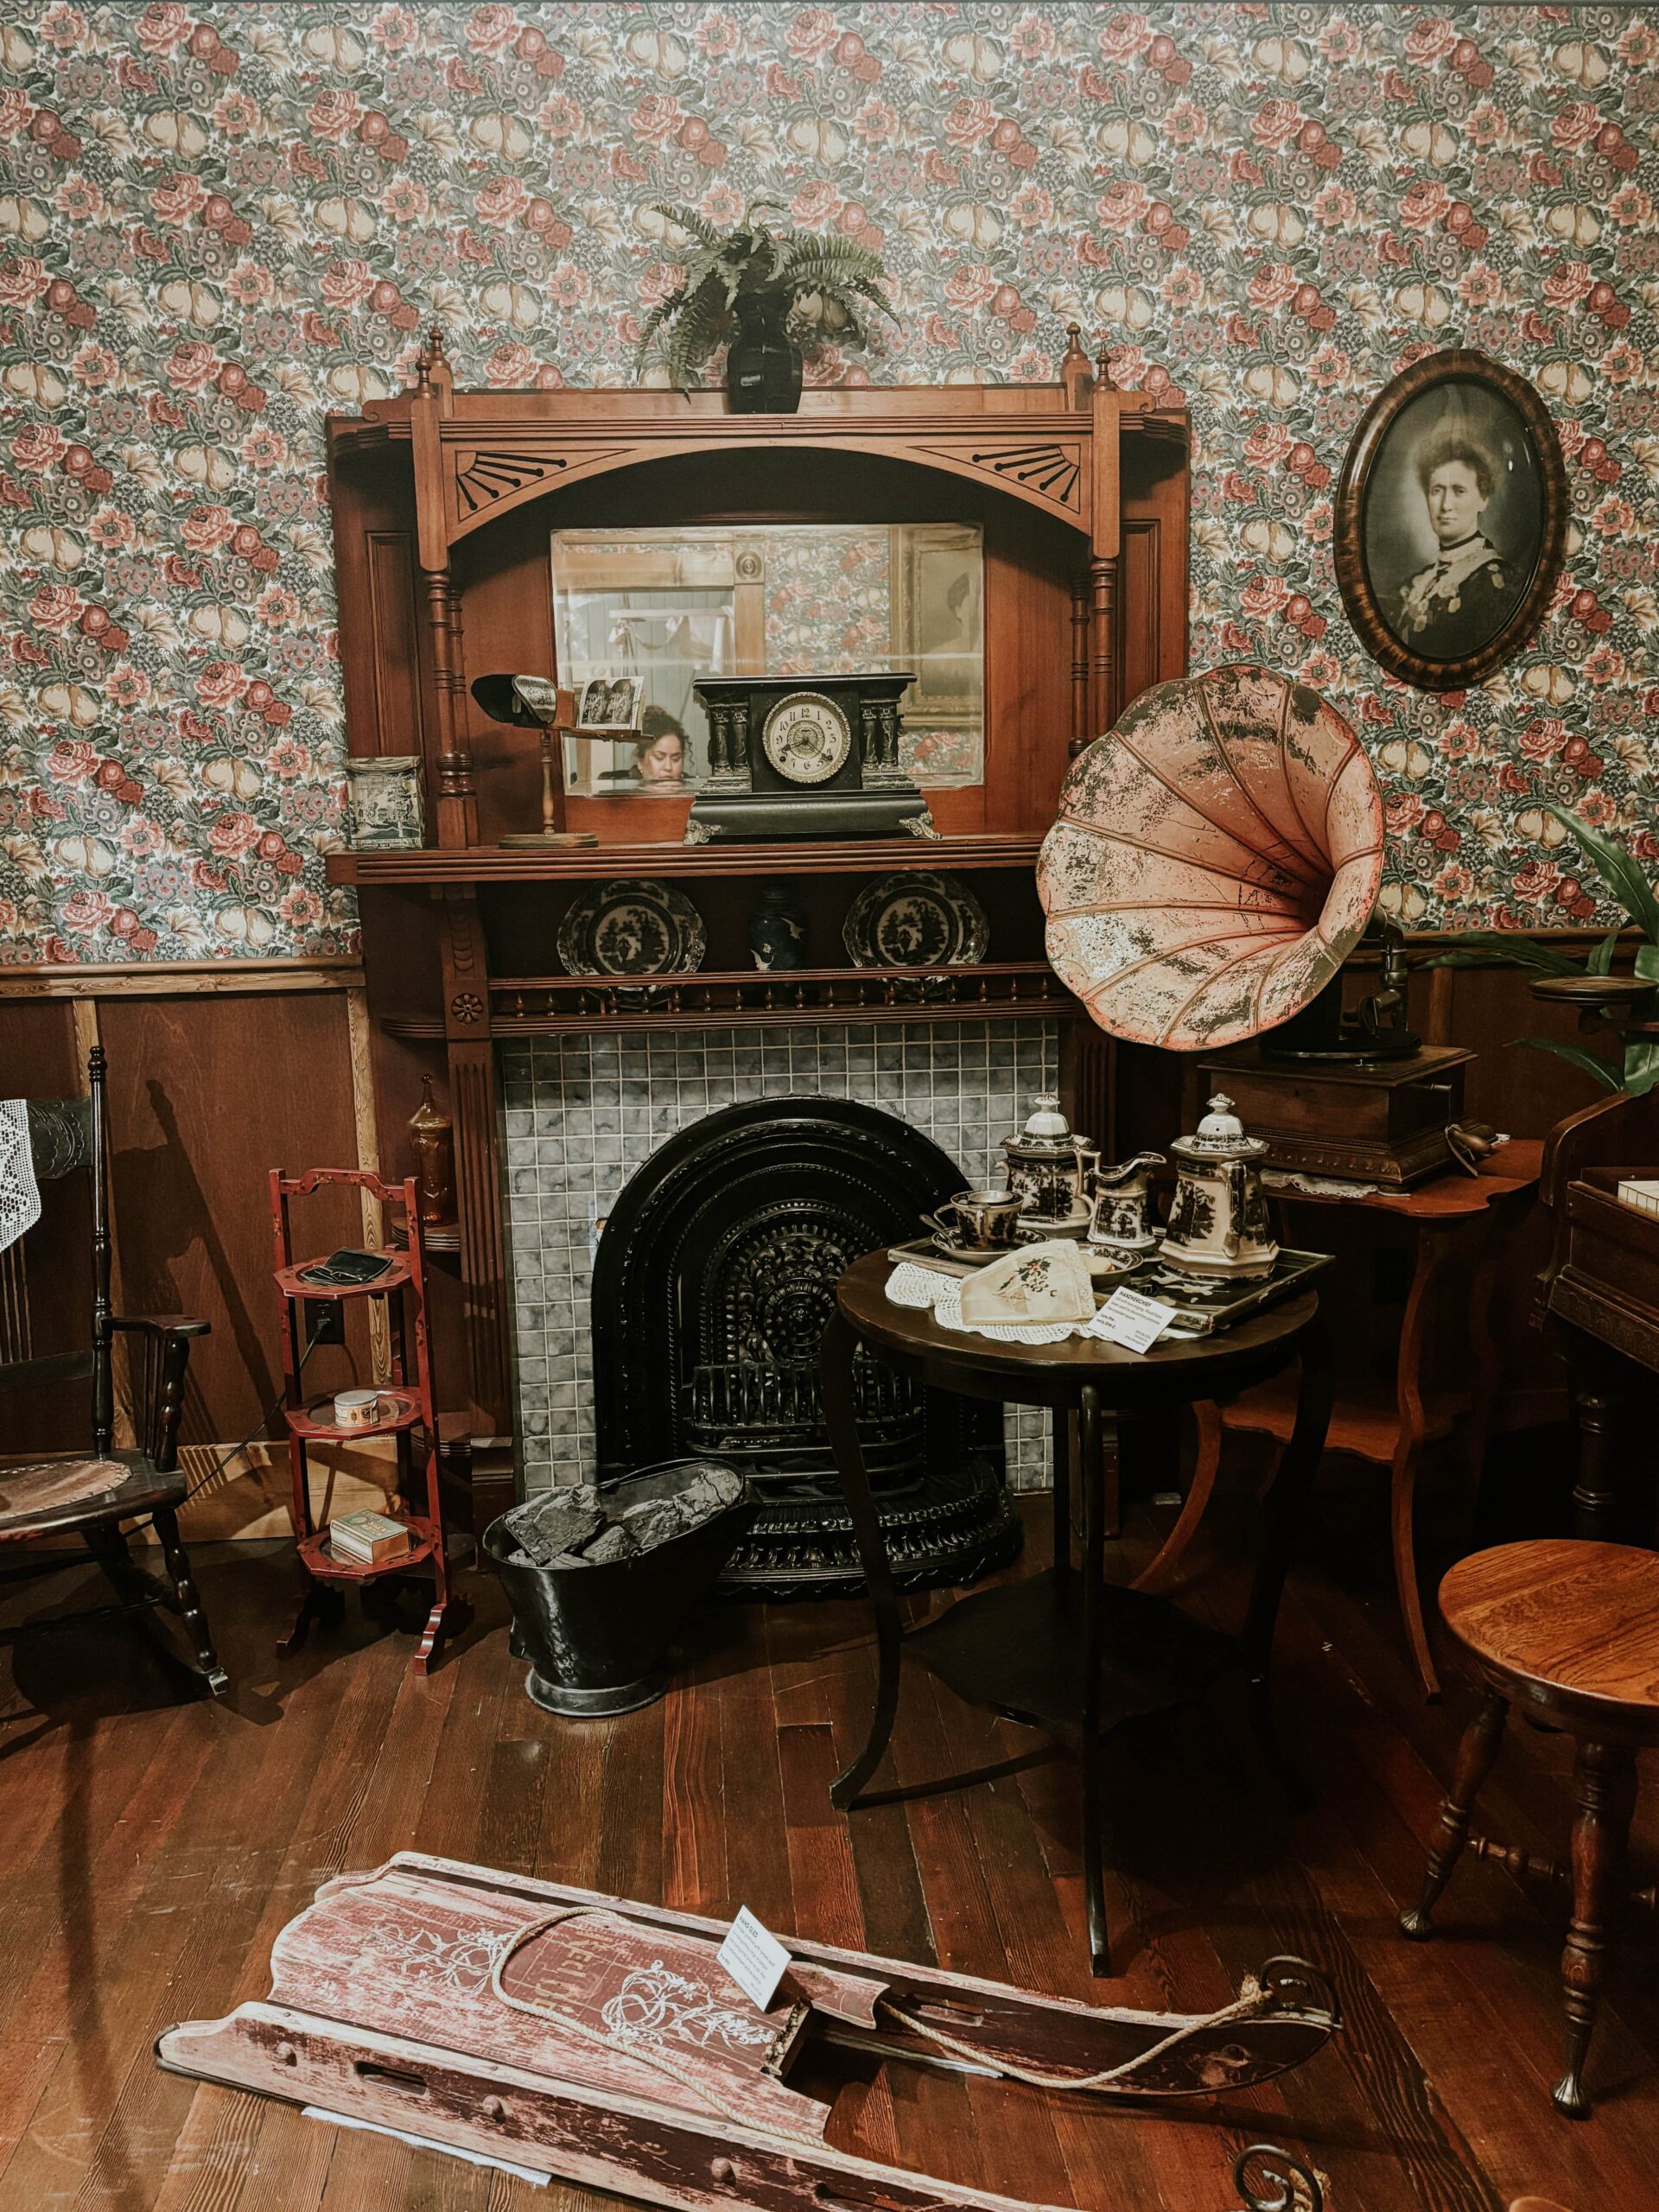 An antique fireplace, with various antique items surrounding it.